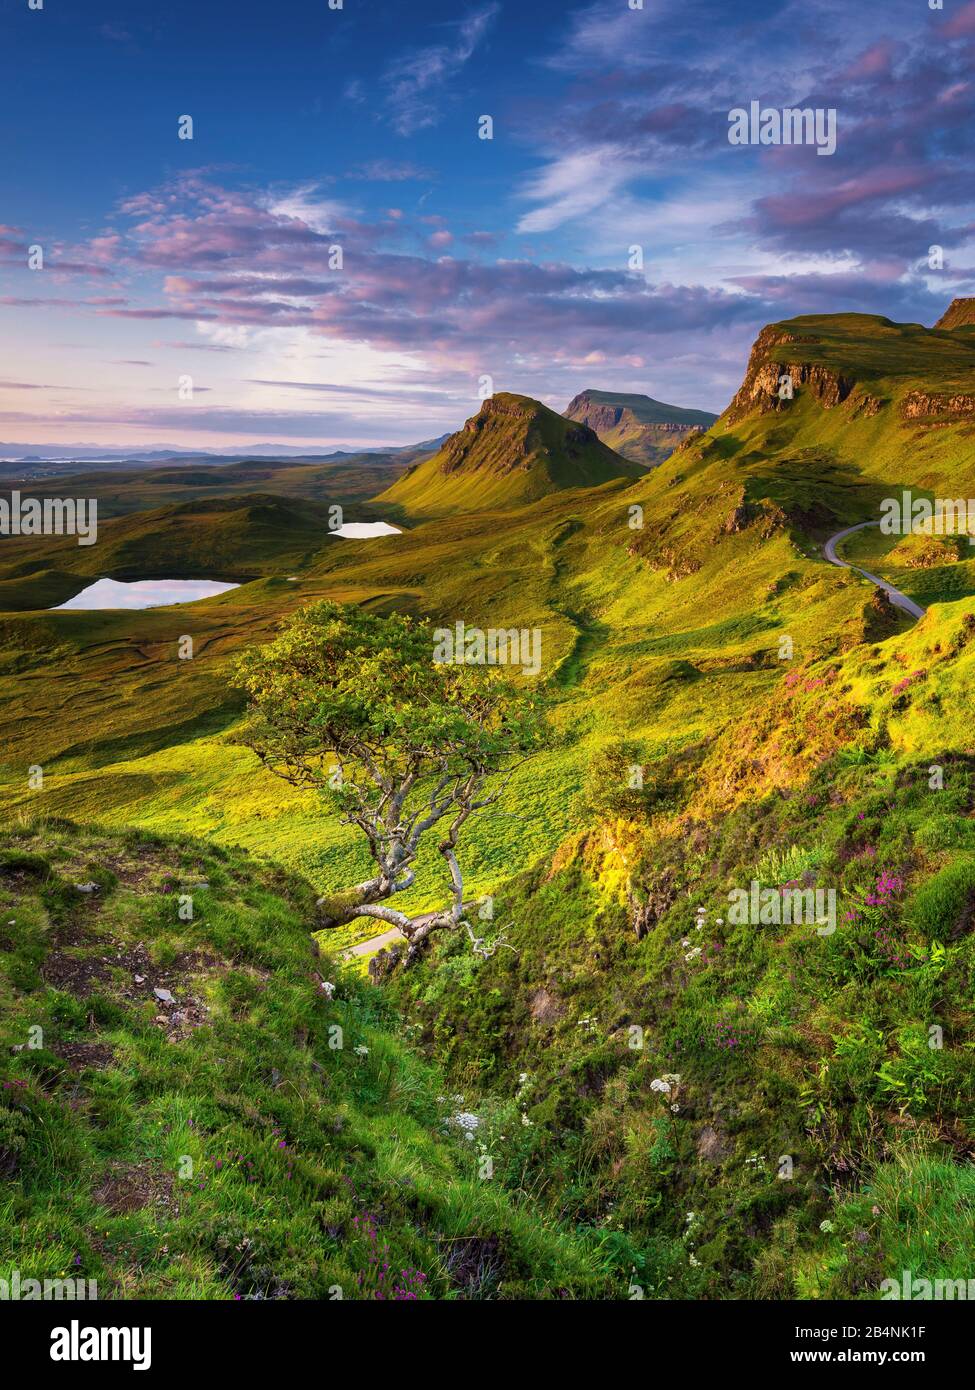 Quiraing, Isle of Skye, Scotland, view over the highlands Stock Photo